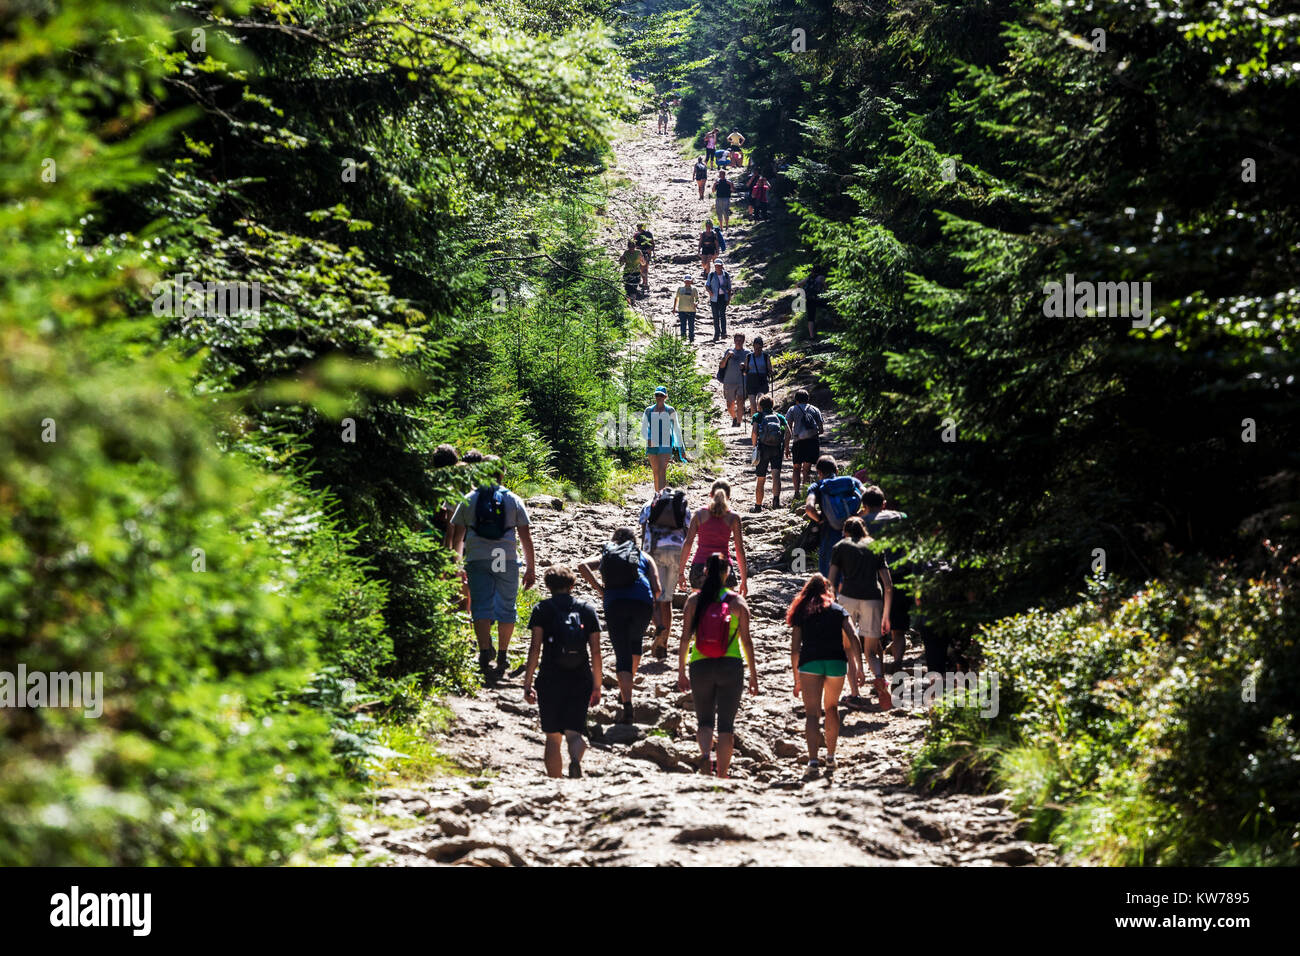 Crowd of people, crowds, congestion, Sumava National Park, Czech Republic Europe Crowded paths of Visitors in Forest Summer Stock Photo